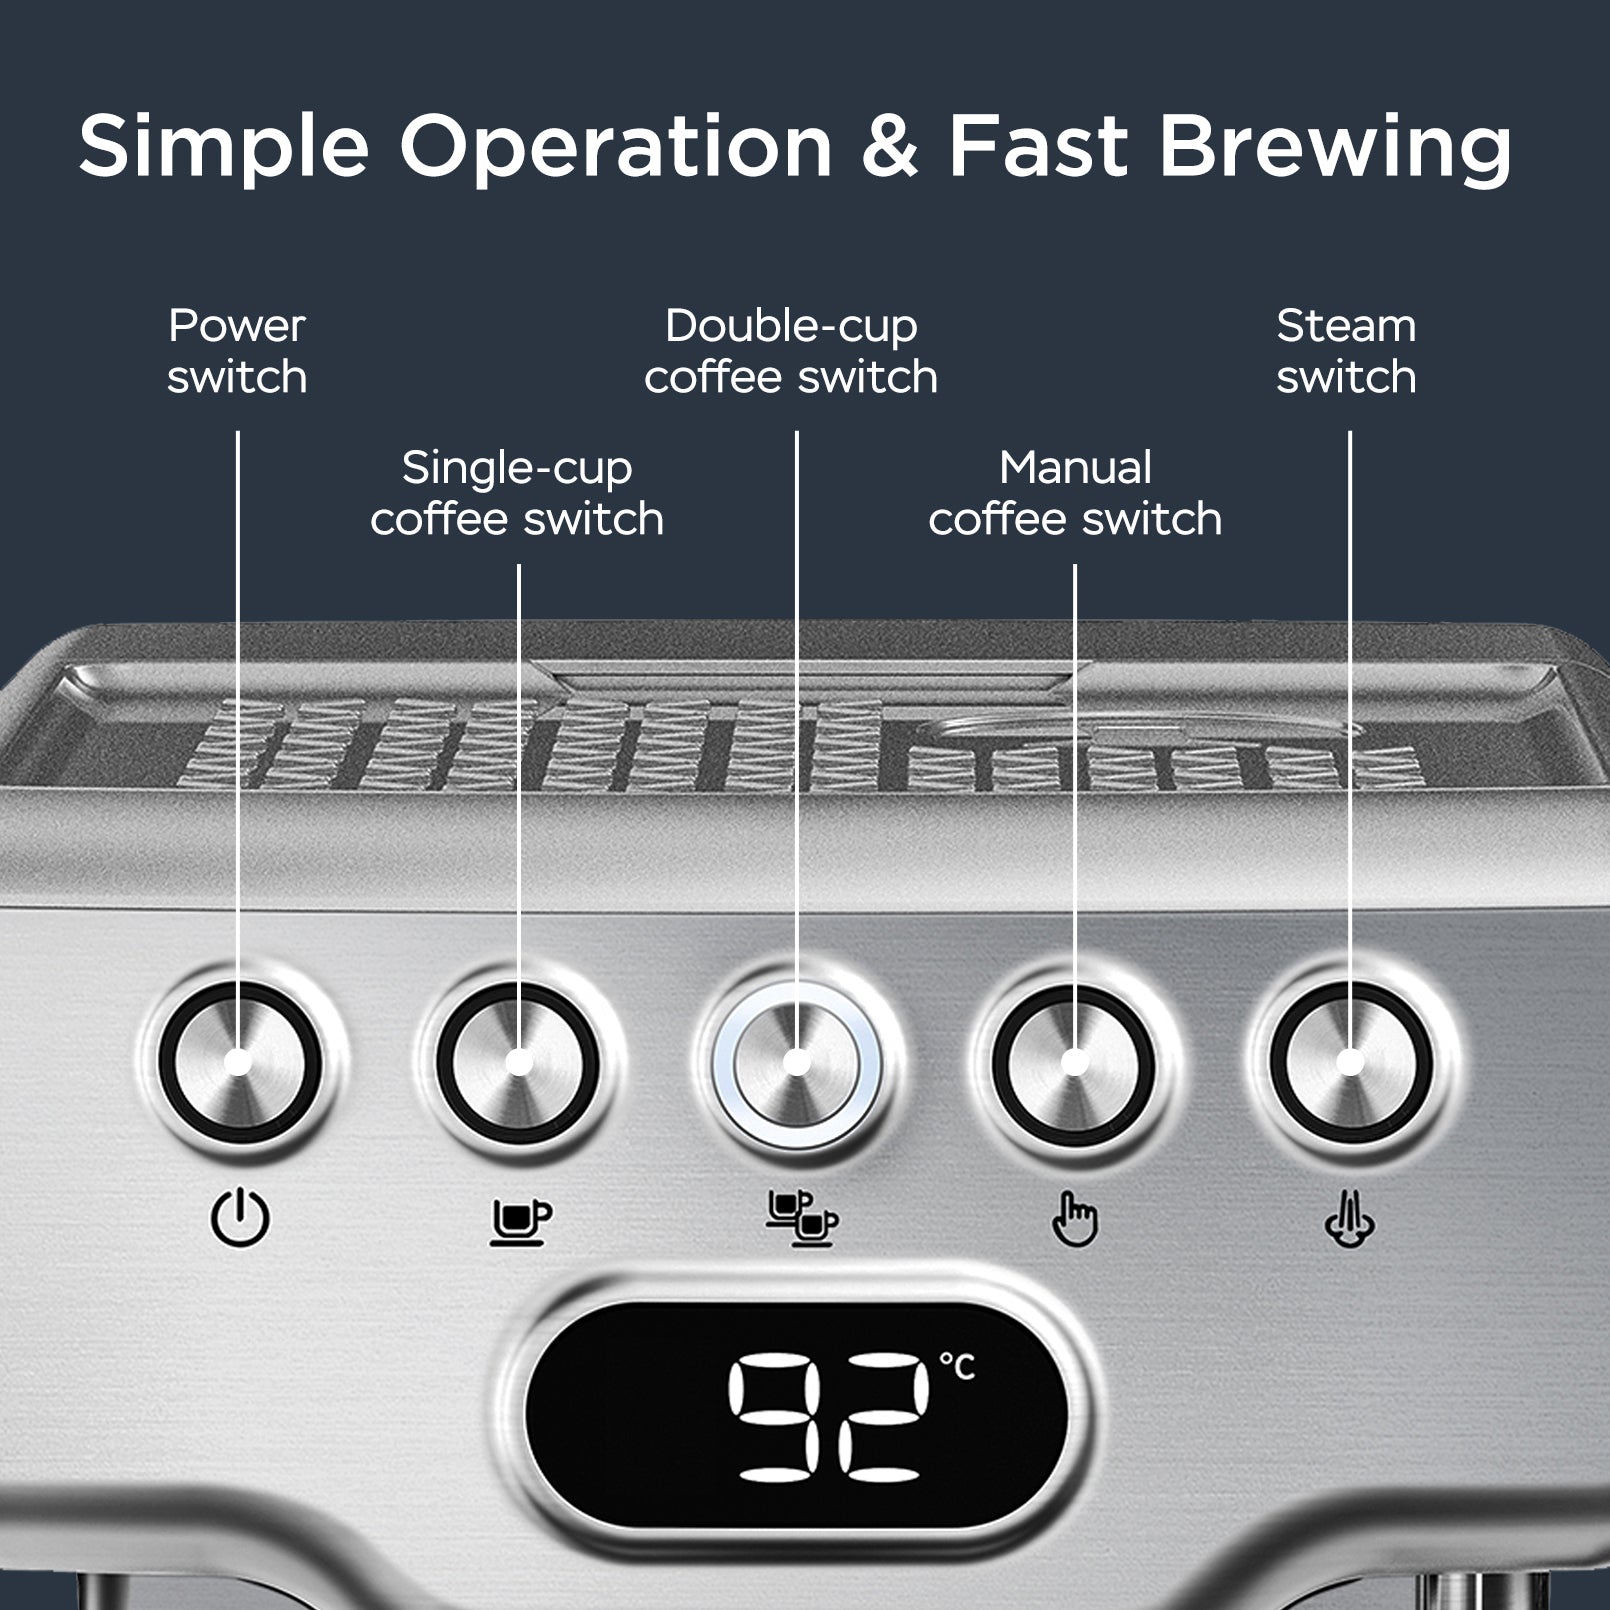 Chef Espresso Machine With Milk Frother - Easybuynook